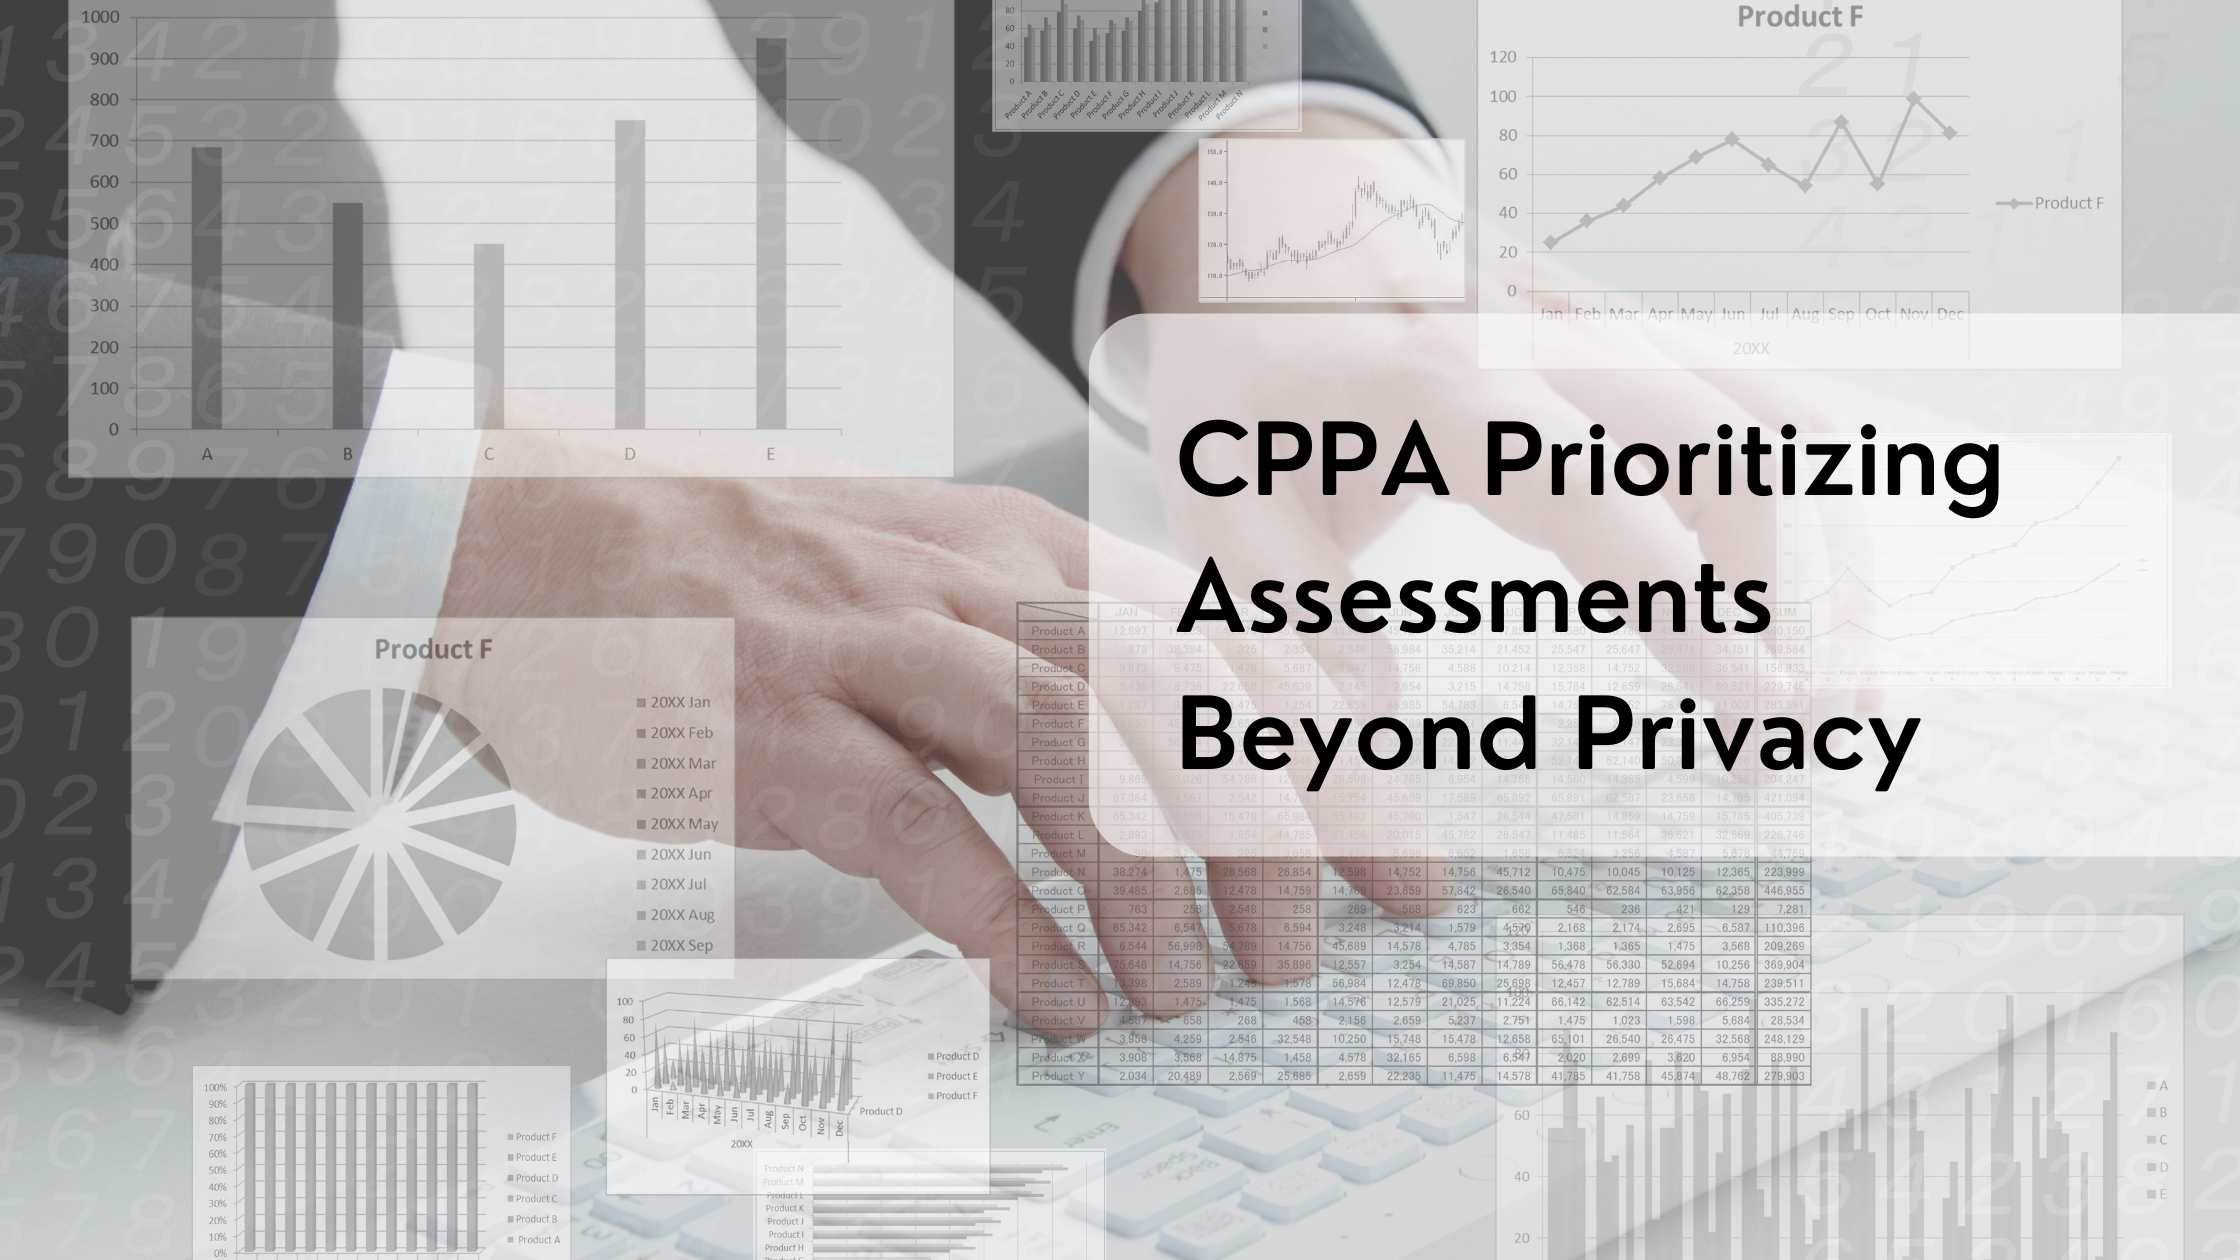 ccpa prioritizes assessments